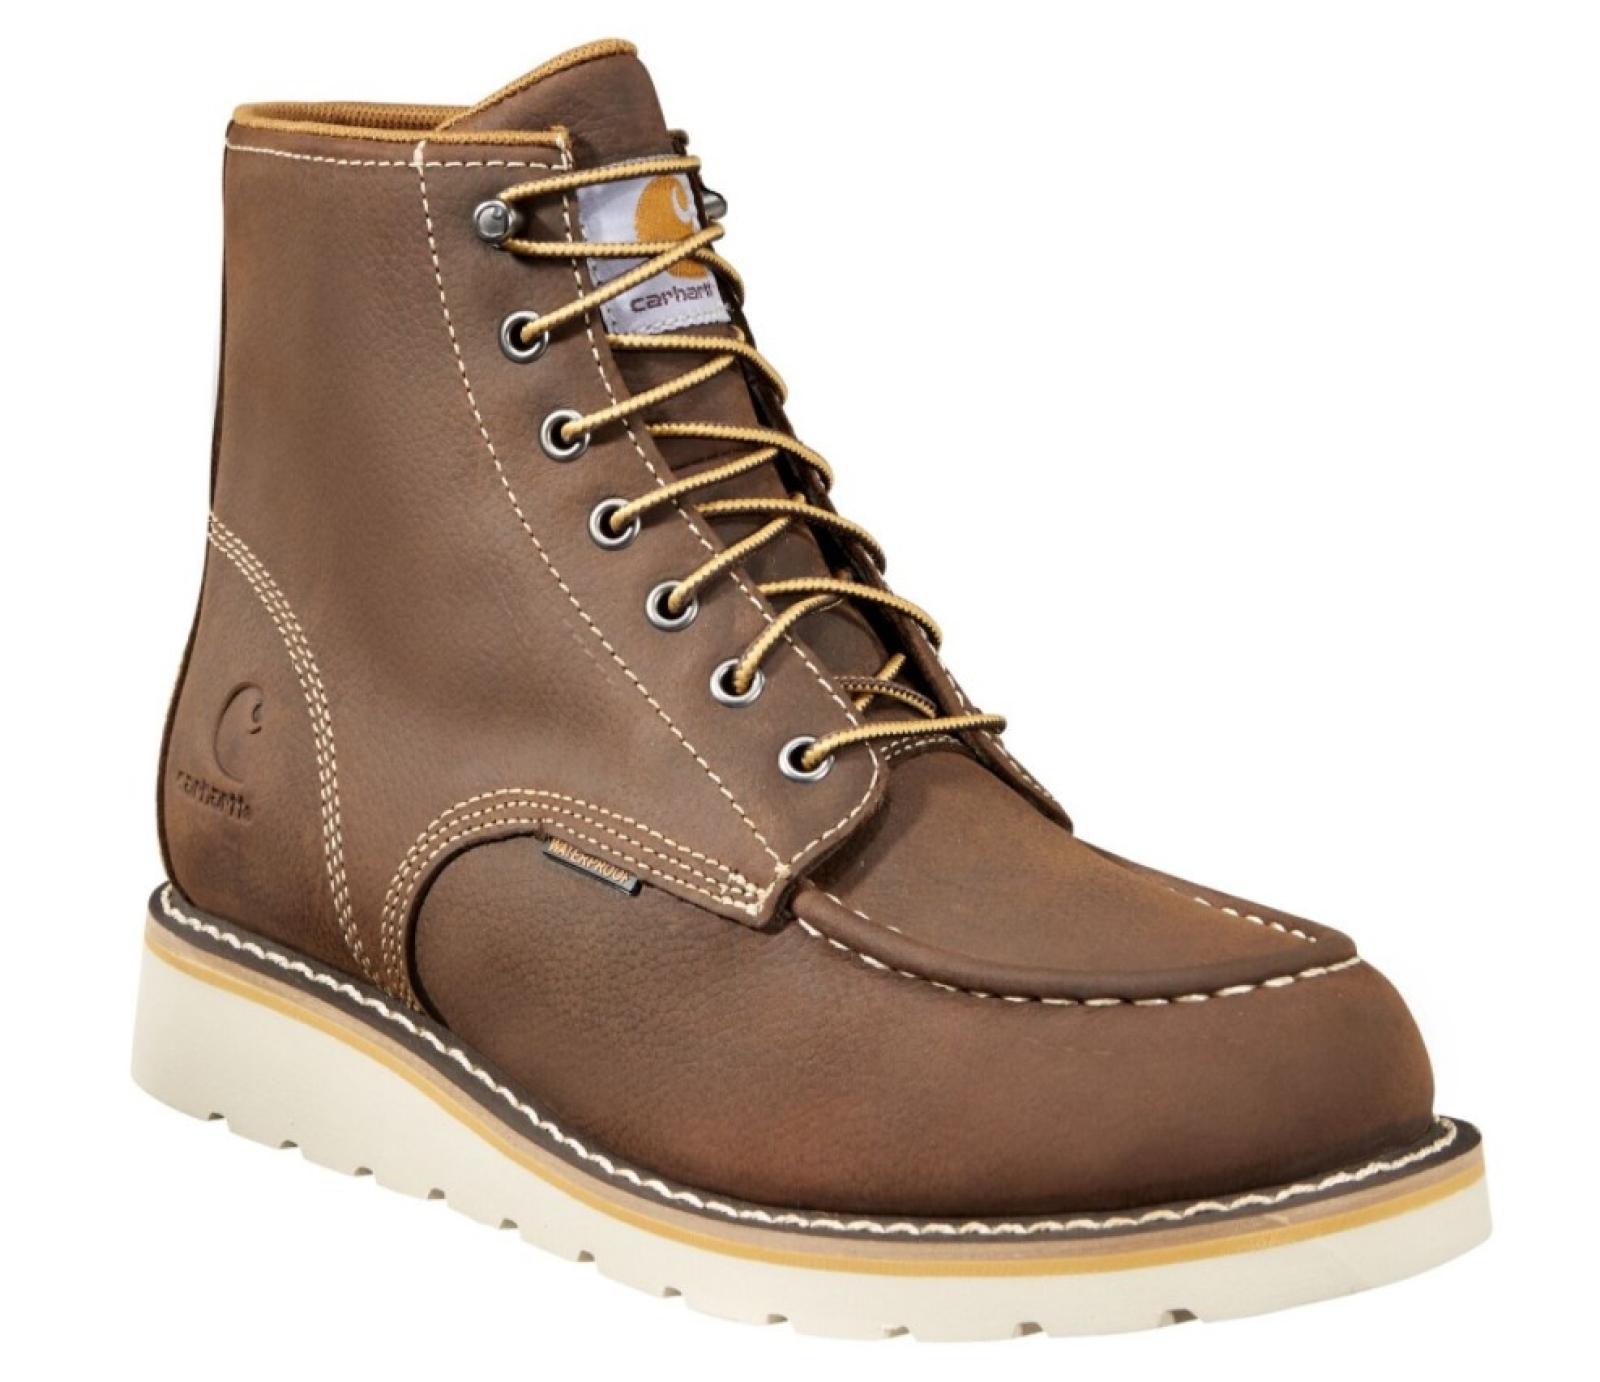 Carhartt 6-Inch Non-Safety Toe Wedge Boot Angled Profile View